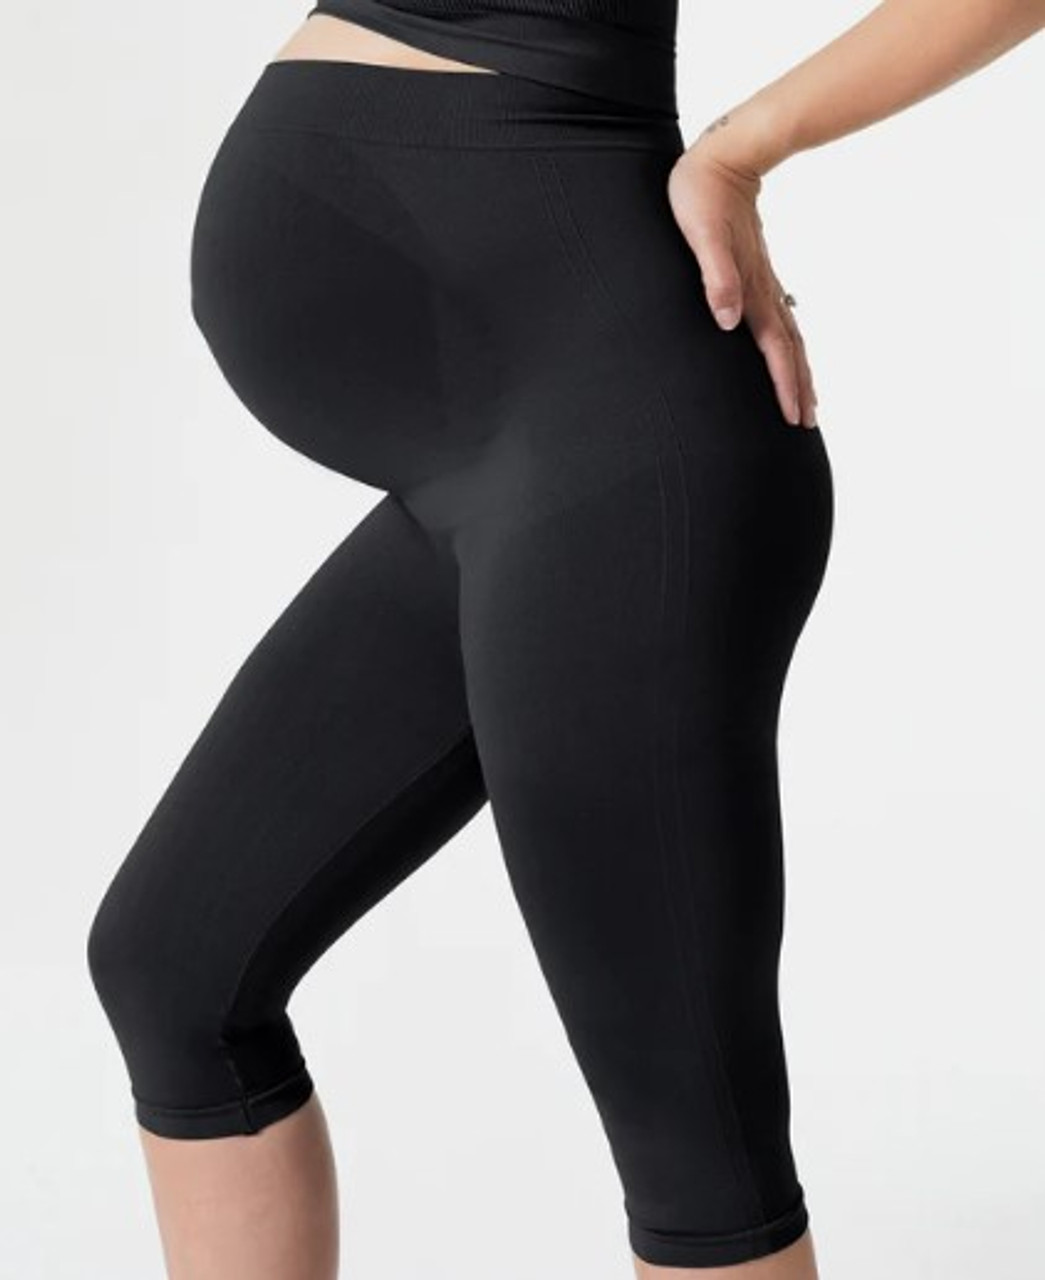 Aggregate more than 155 blanqi everyday maternity leggings latest